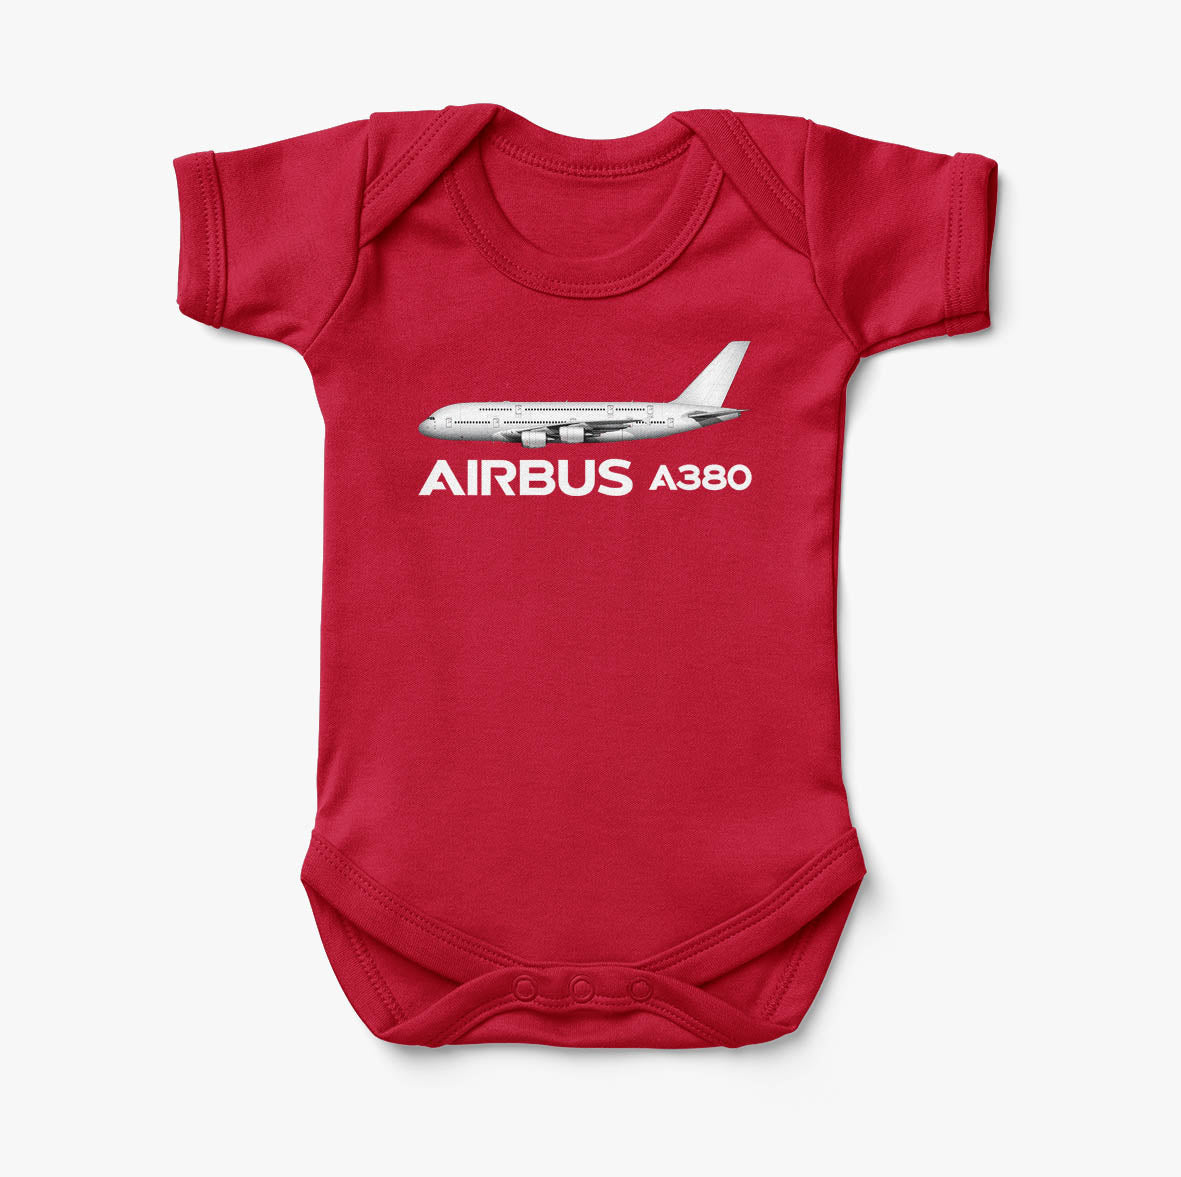 The Airbus A380 Designed Baby Bodysuits